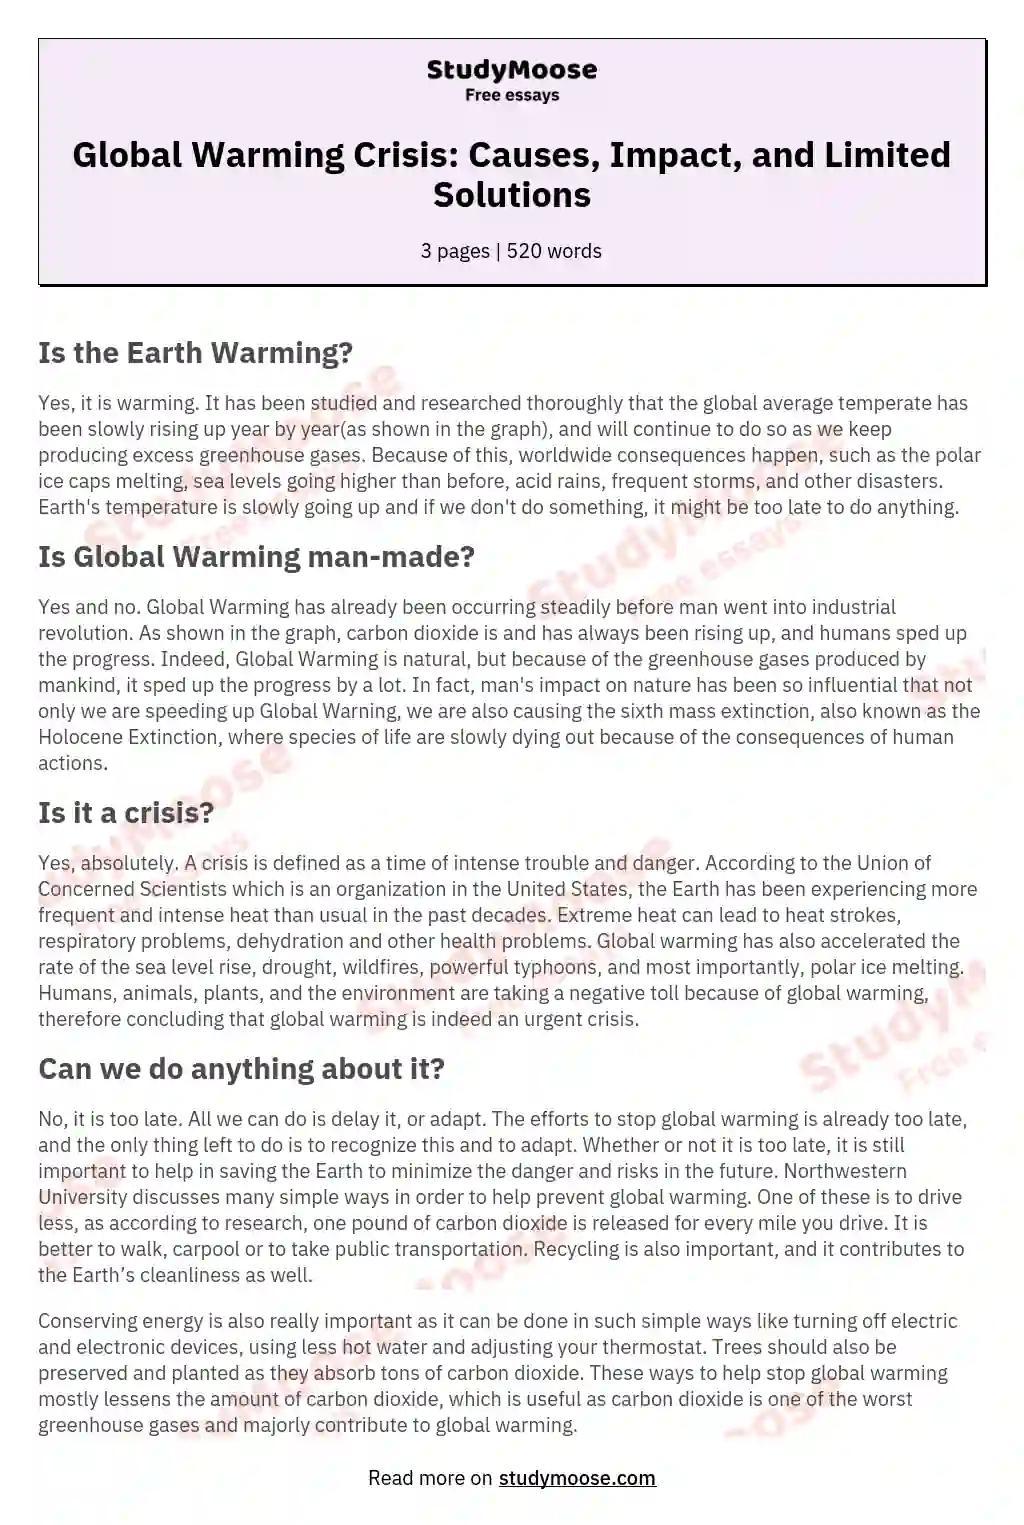 Global Warming Crisis: Causes, Impact, and Limited Solutions essay